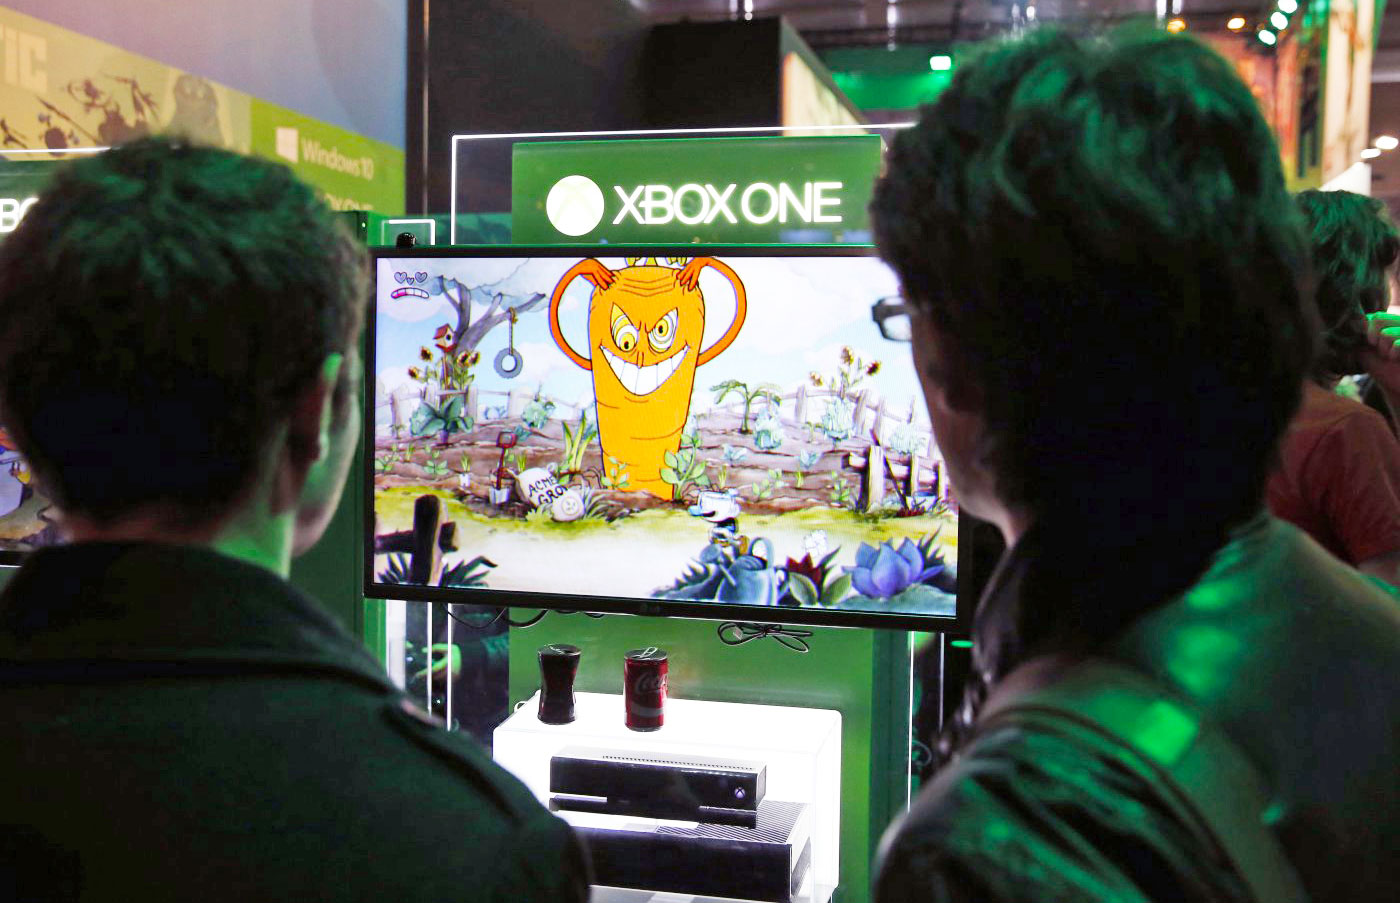 Xbox One price drops to $299 ahead of E3